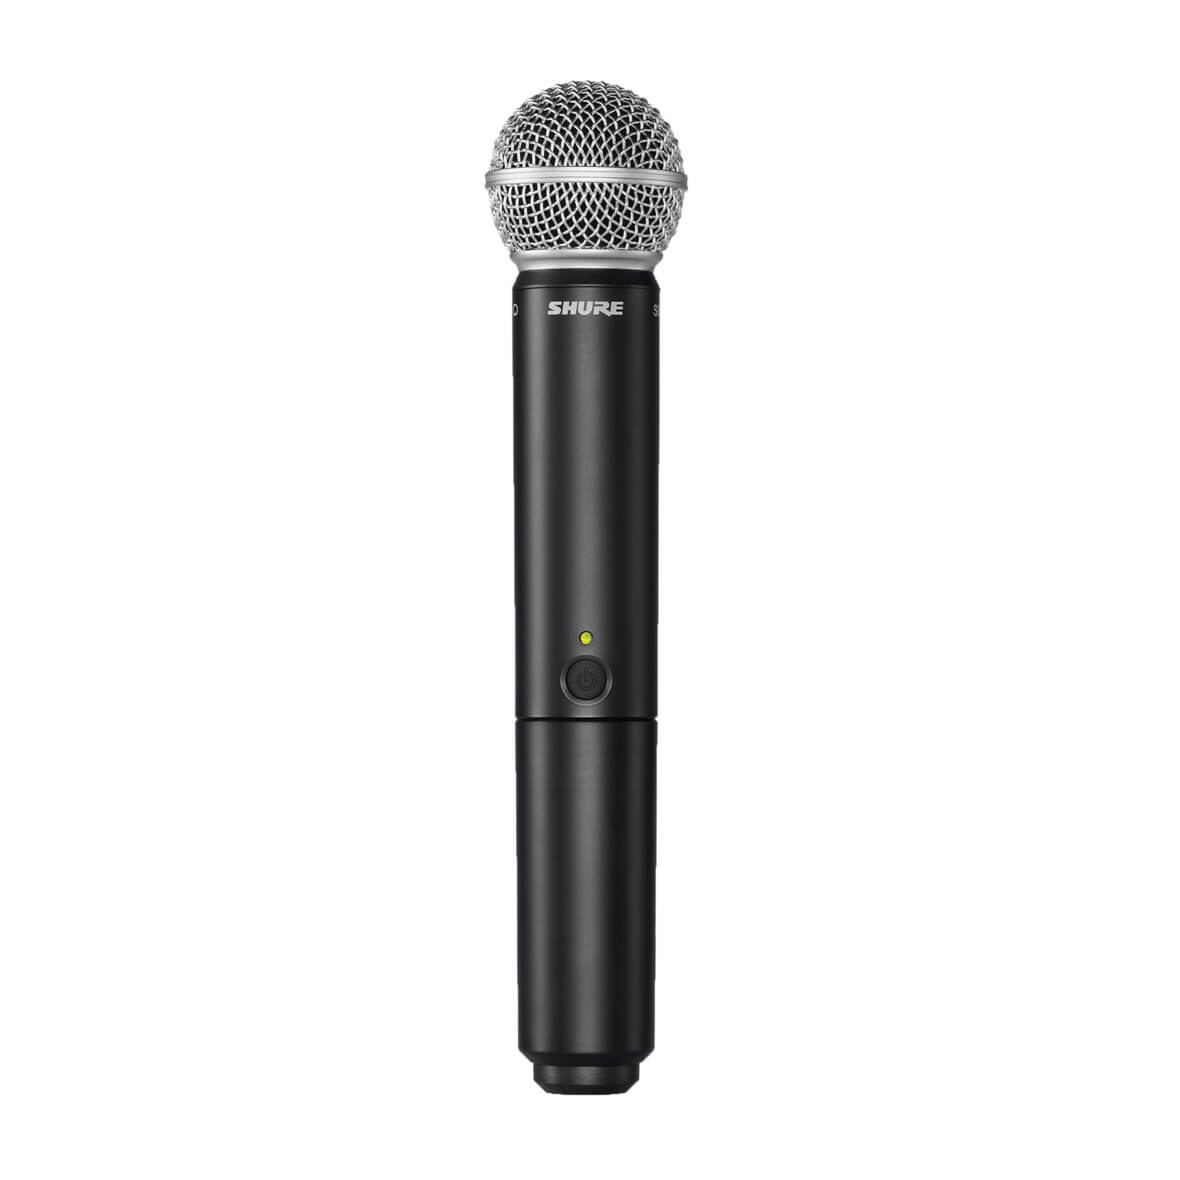 Shure BLX2/SM58 - Handheld transmitter with SM58 capsule